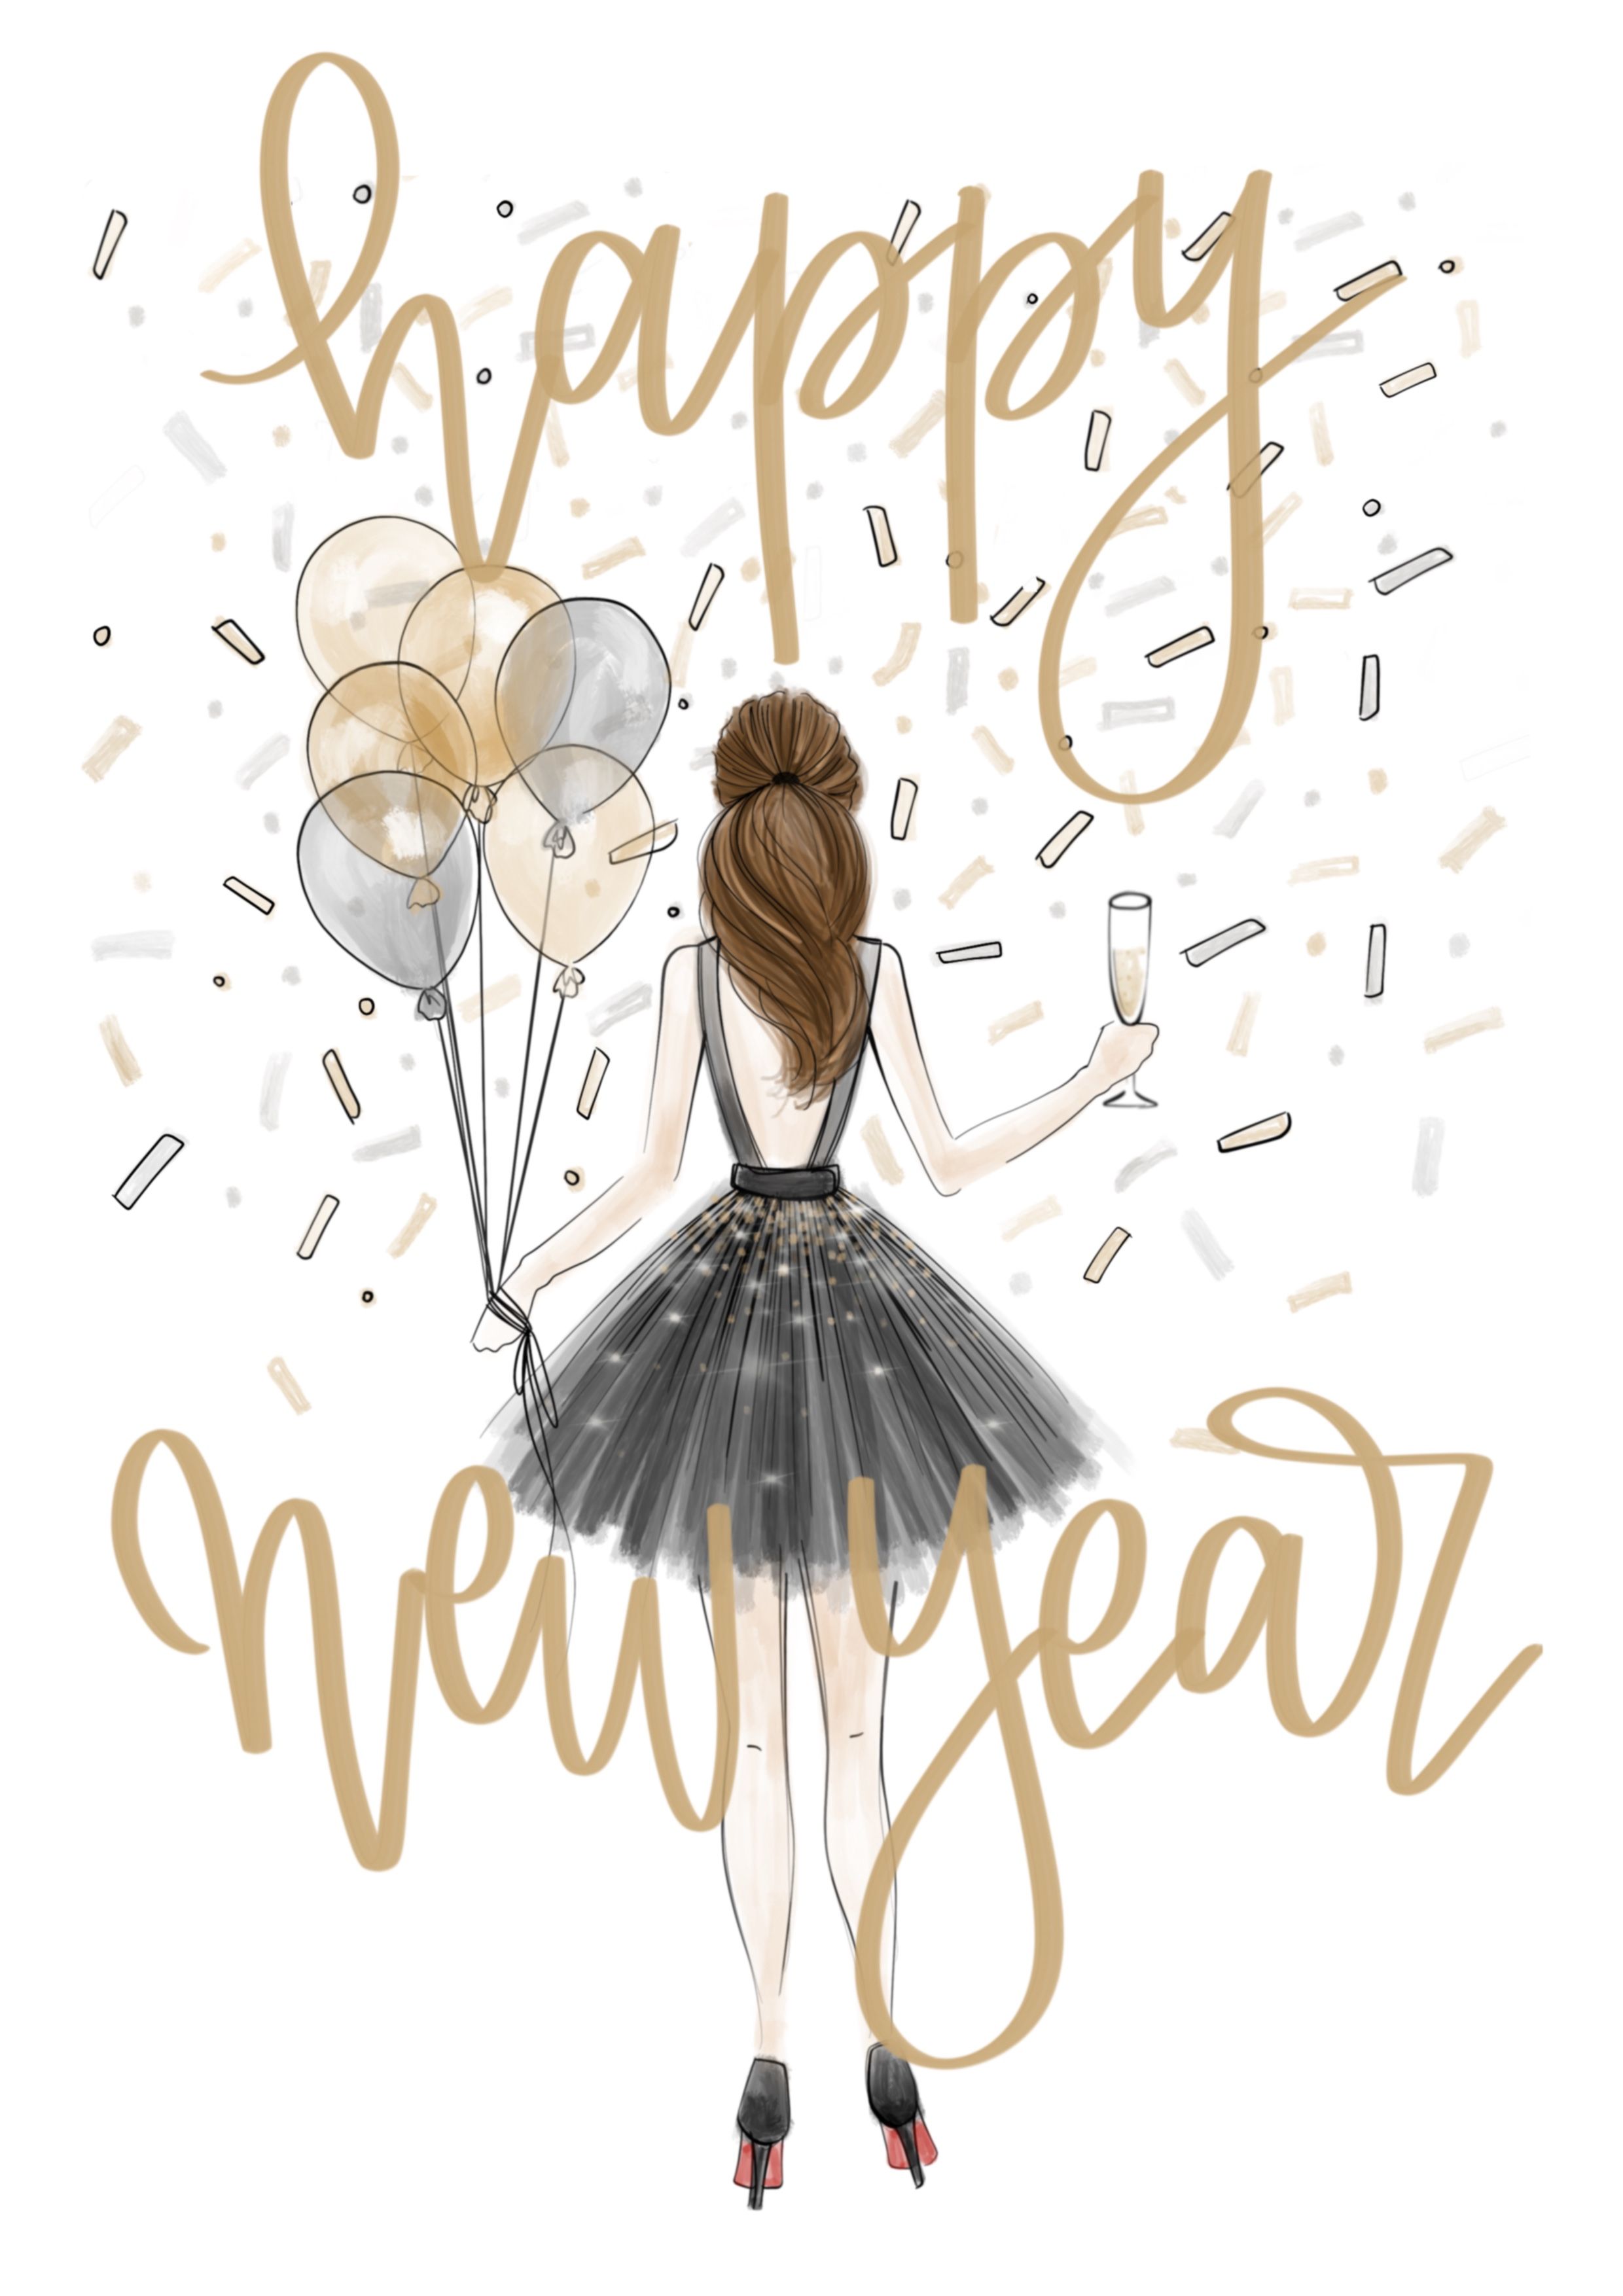 Happy new year celebrate iPhone wallpaper Shop the collection at RedBubble now. Happy new year wallpaper, Happy new year image, New year image